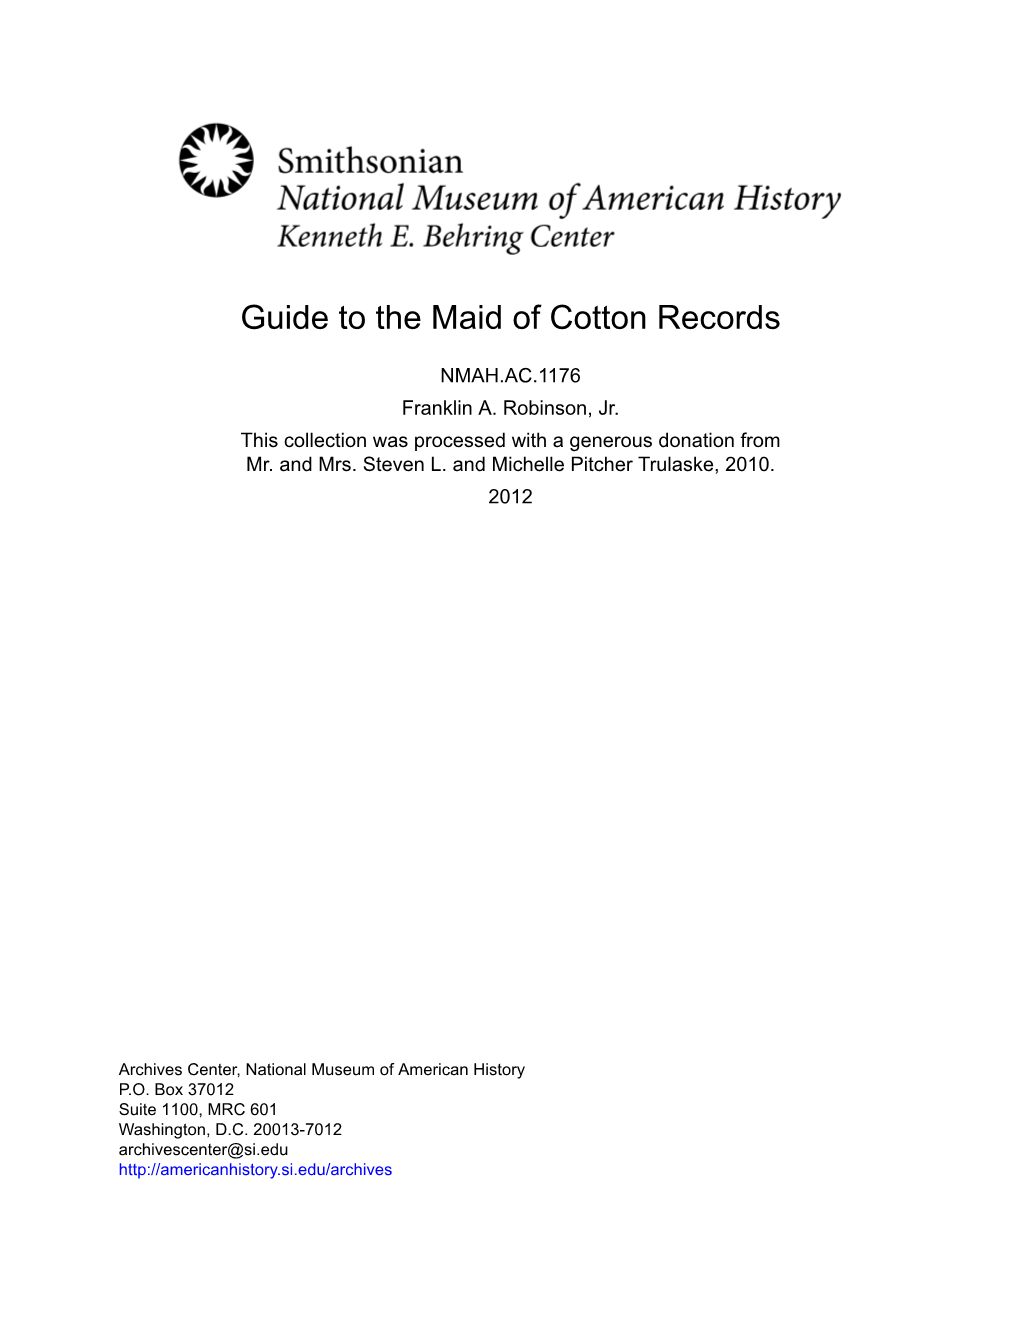 Guide to the Maid of Cotton Records